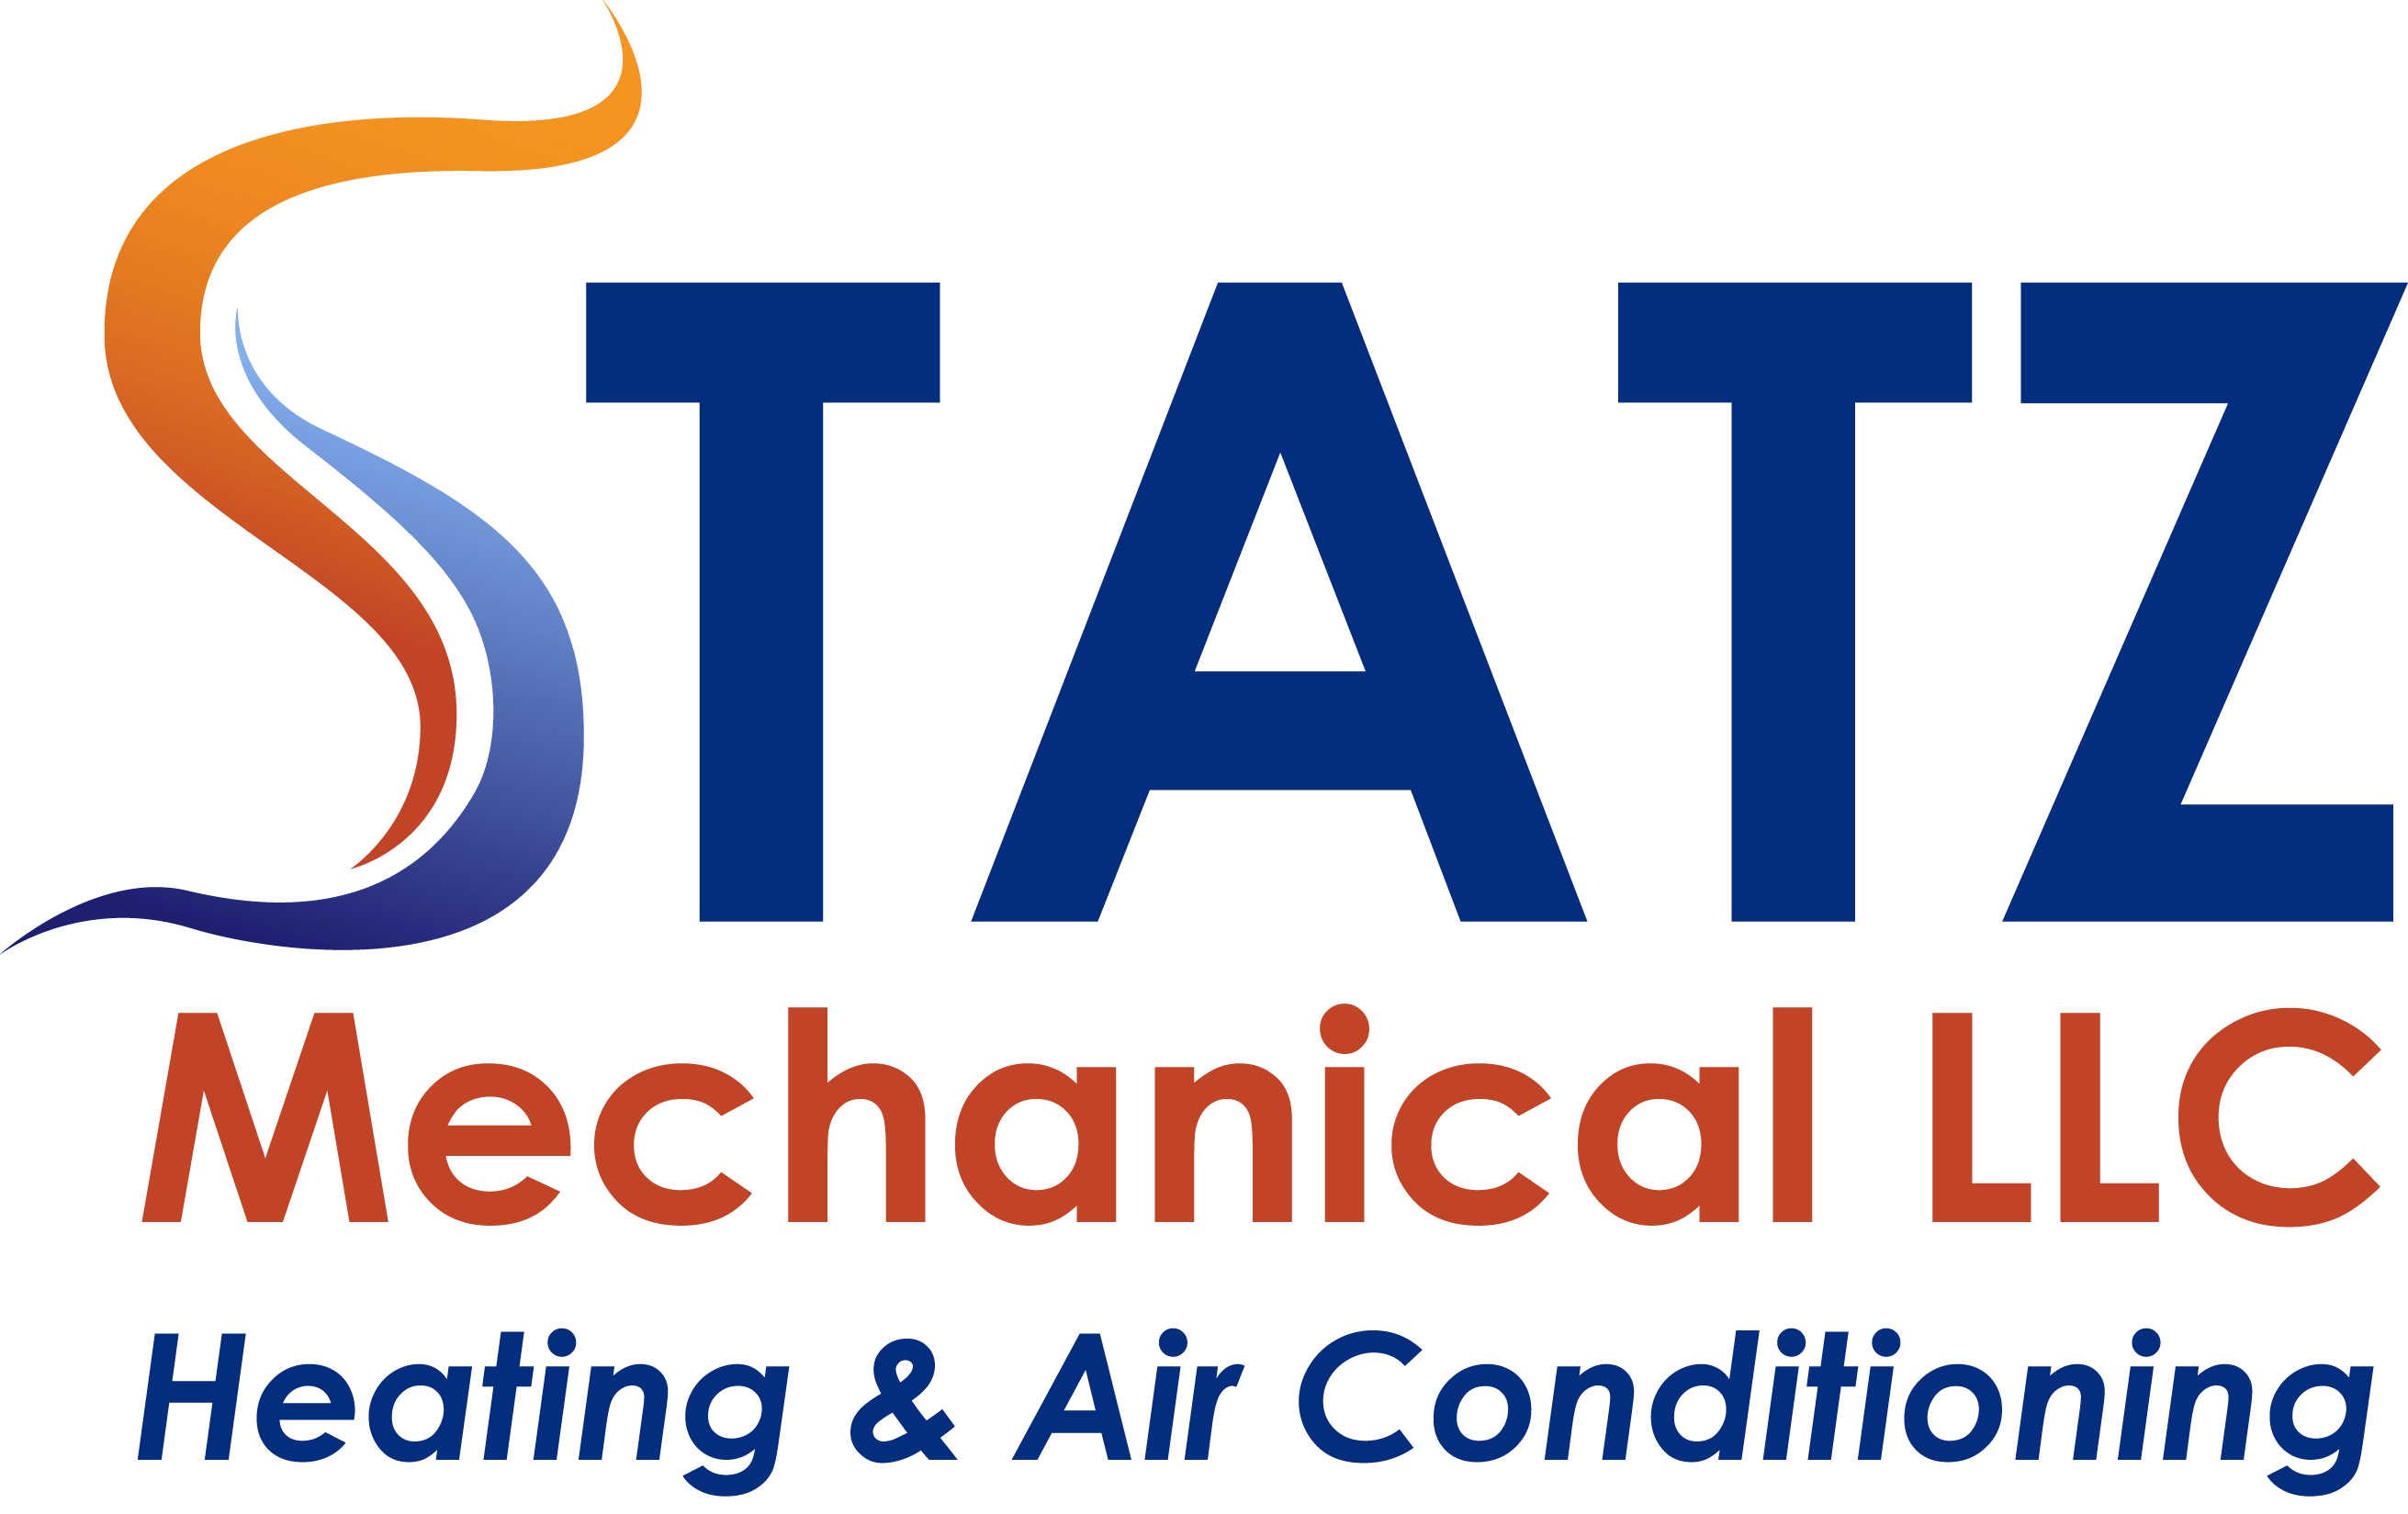 Get your Furnace service done in Baraboo WI by Statz Mechanical LLC 